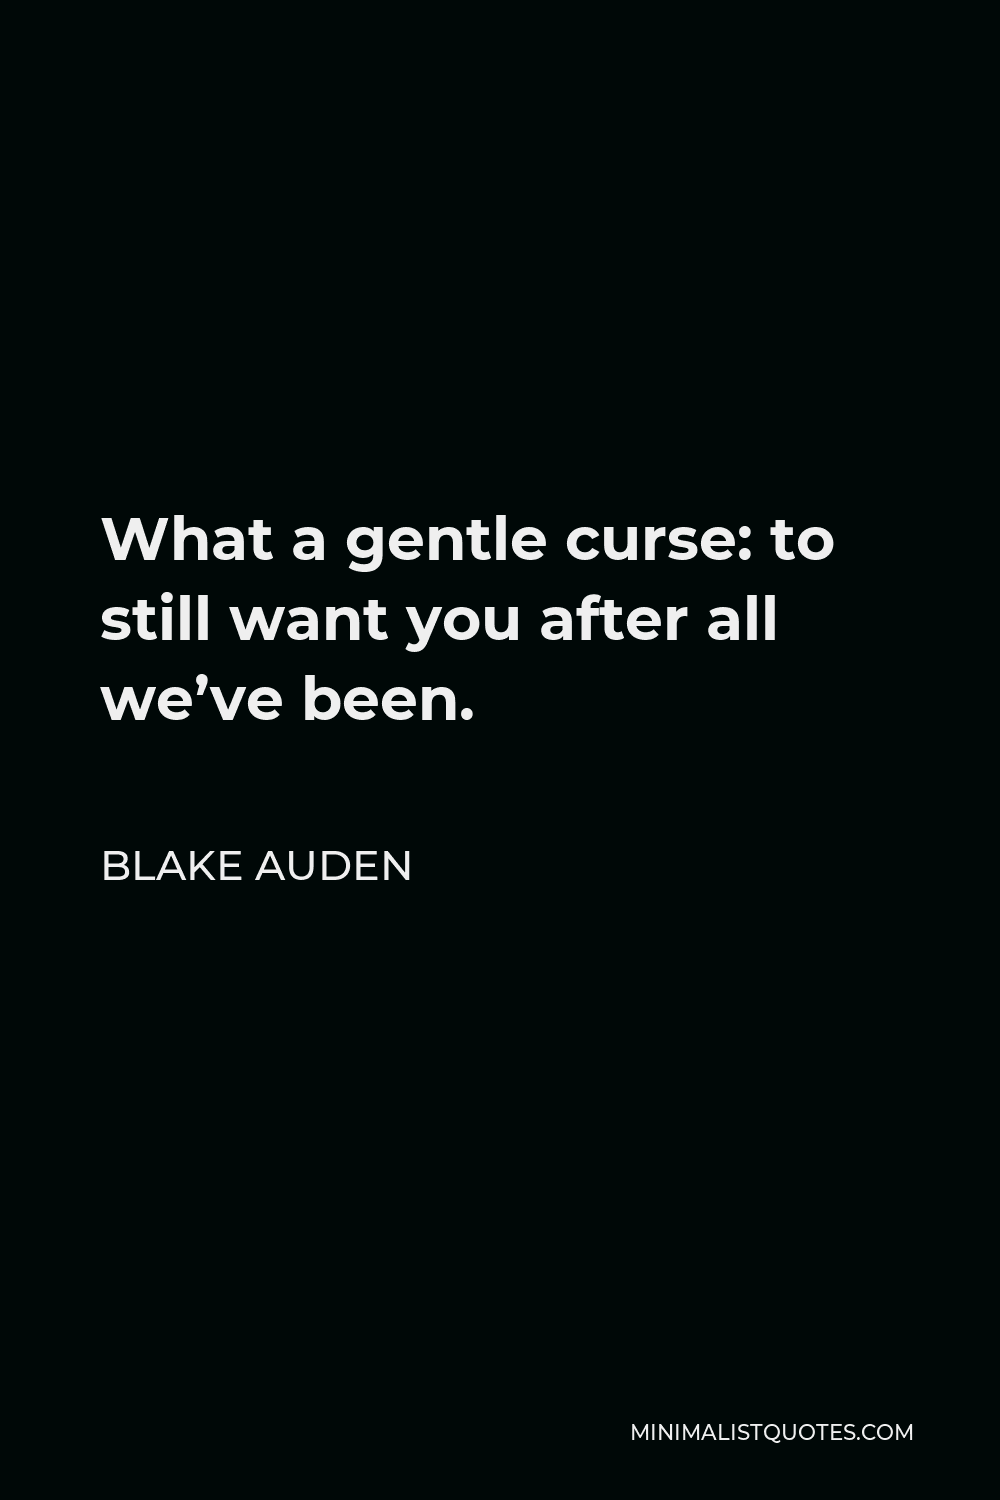 Blake Auden Quote - What a gentle curse: to still want you after all we’ve been.